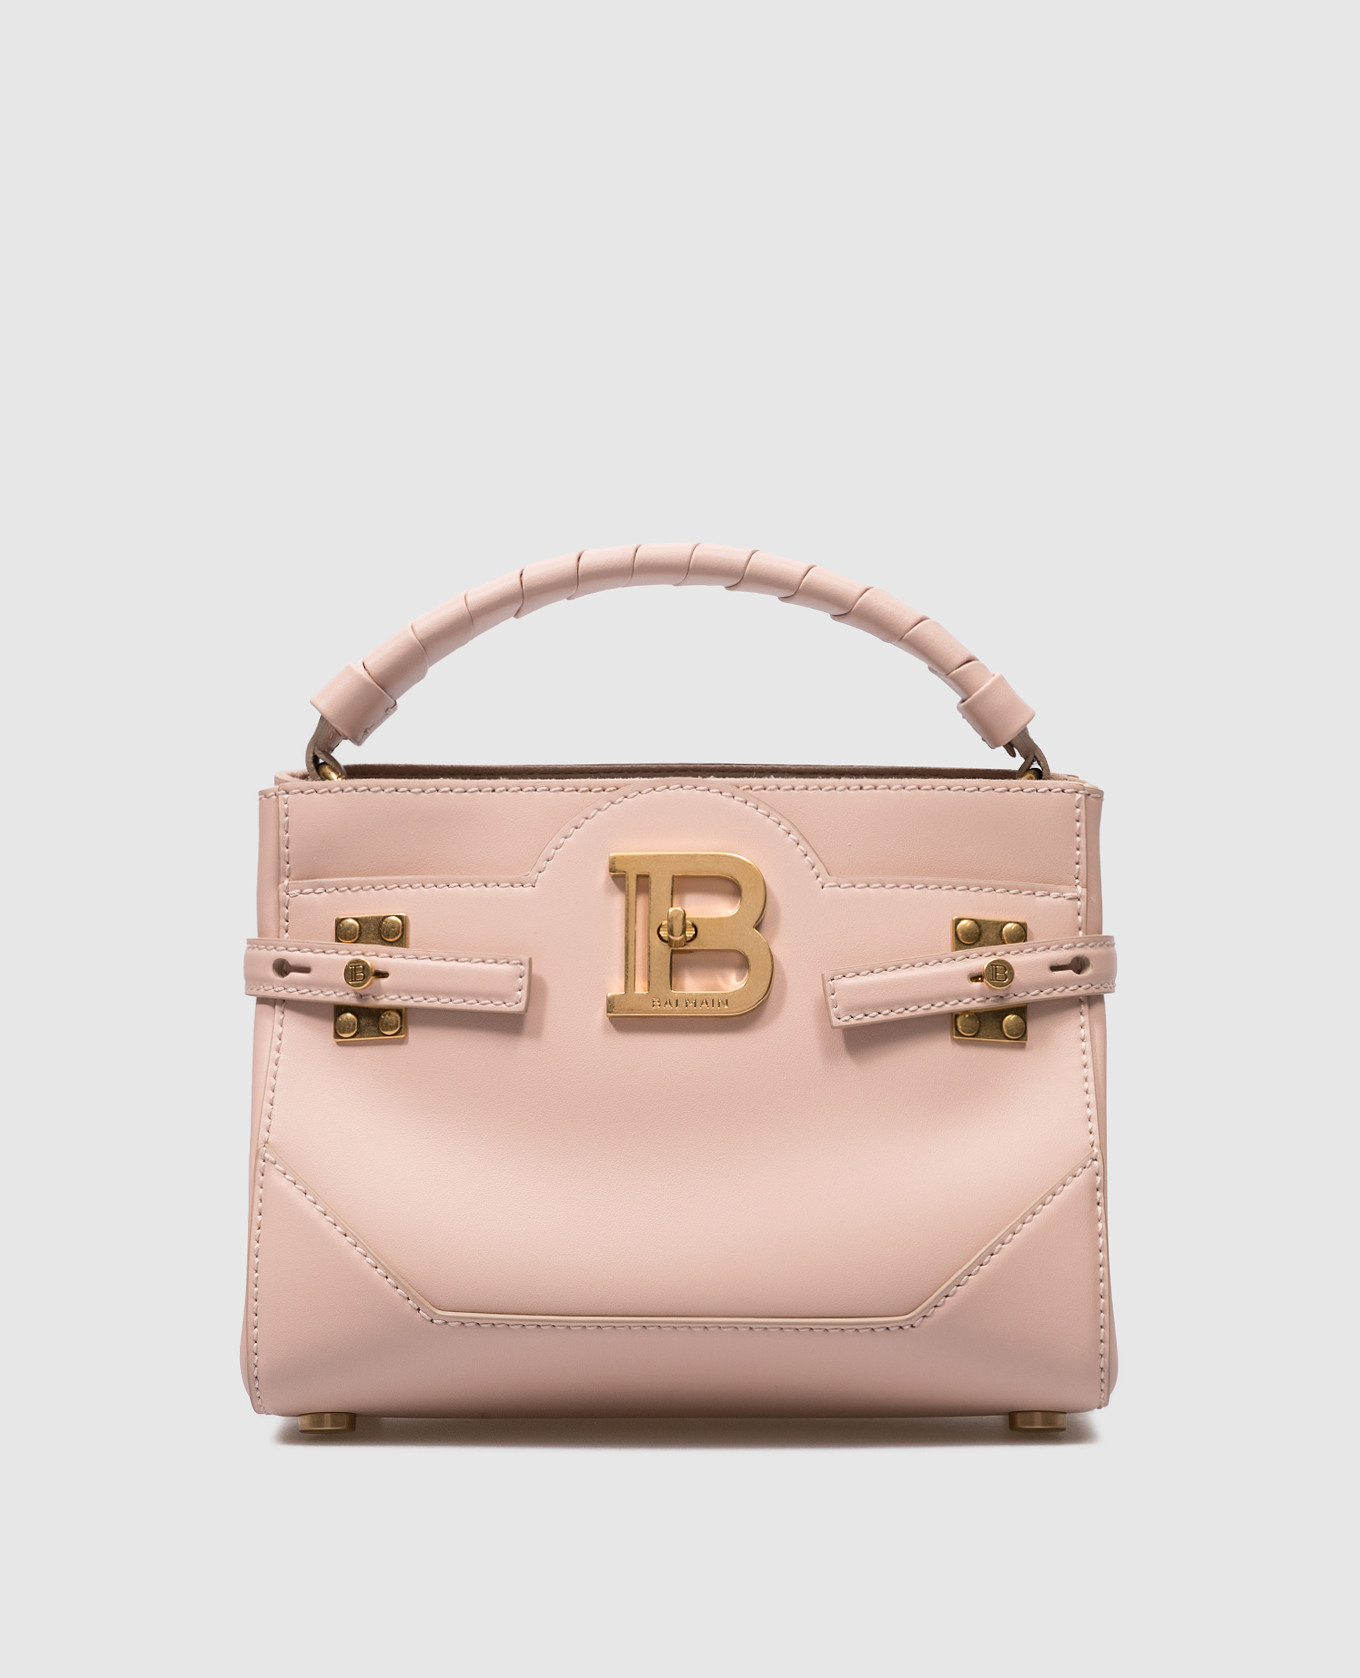 B-BUZZ 22 beige leather bag with metal logo